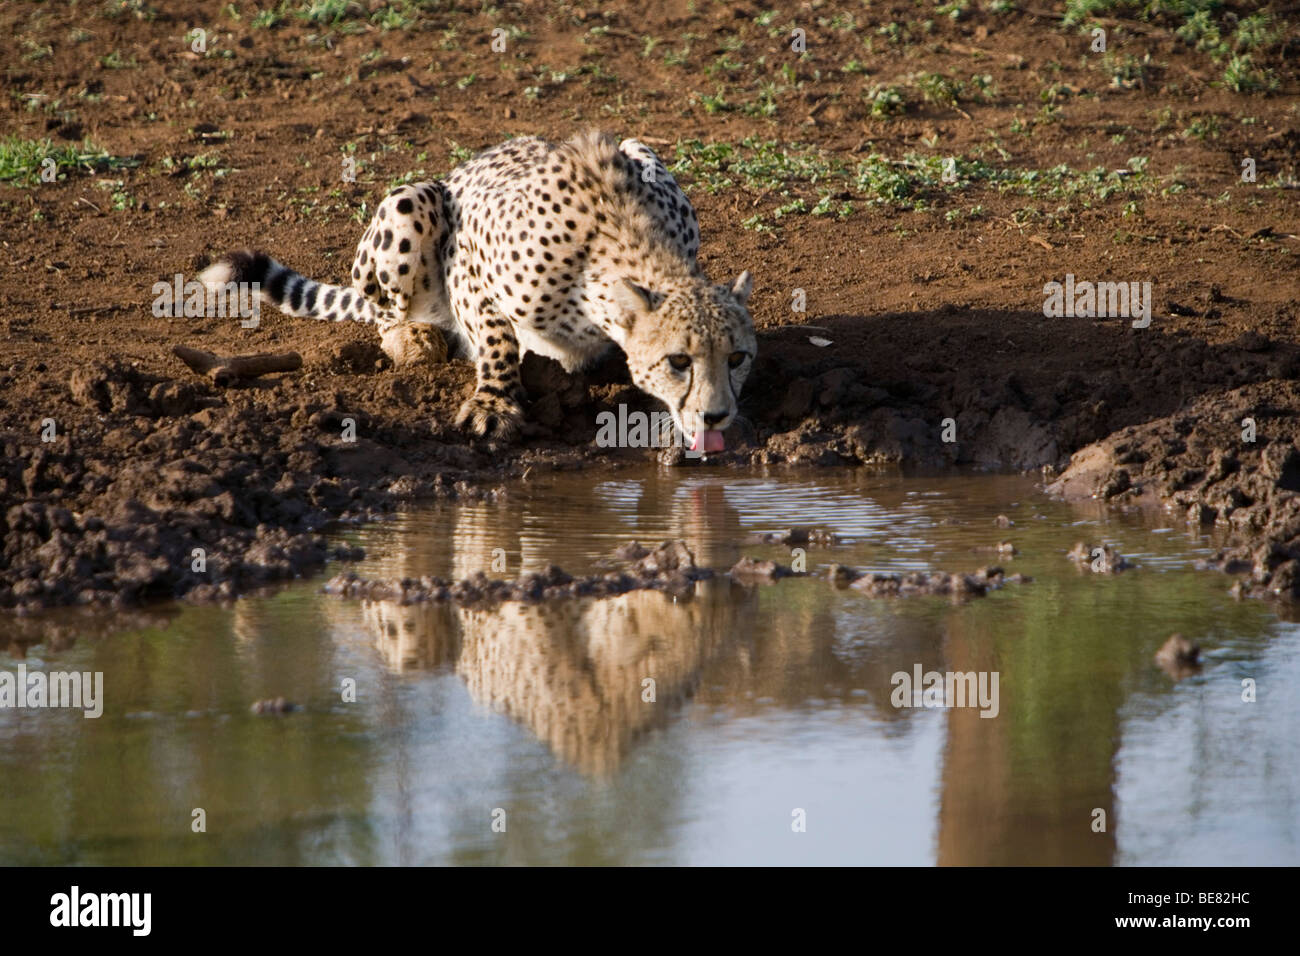 Cheetah at a water hole seen during a safari, Phinda Resource Reserve, KwaZulu-Natal, South Africa, Africa Stock Photo